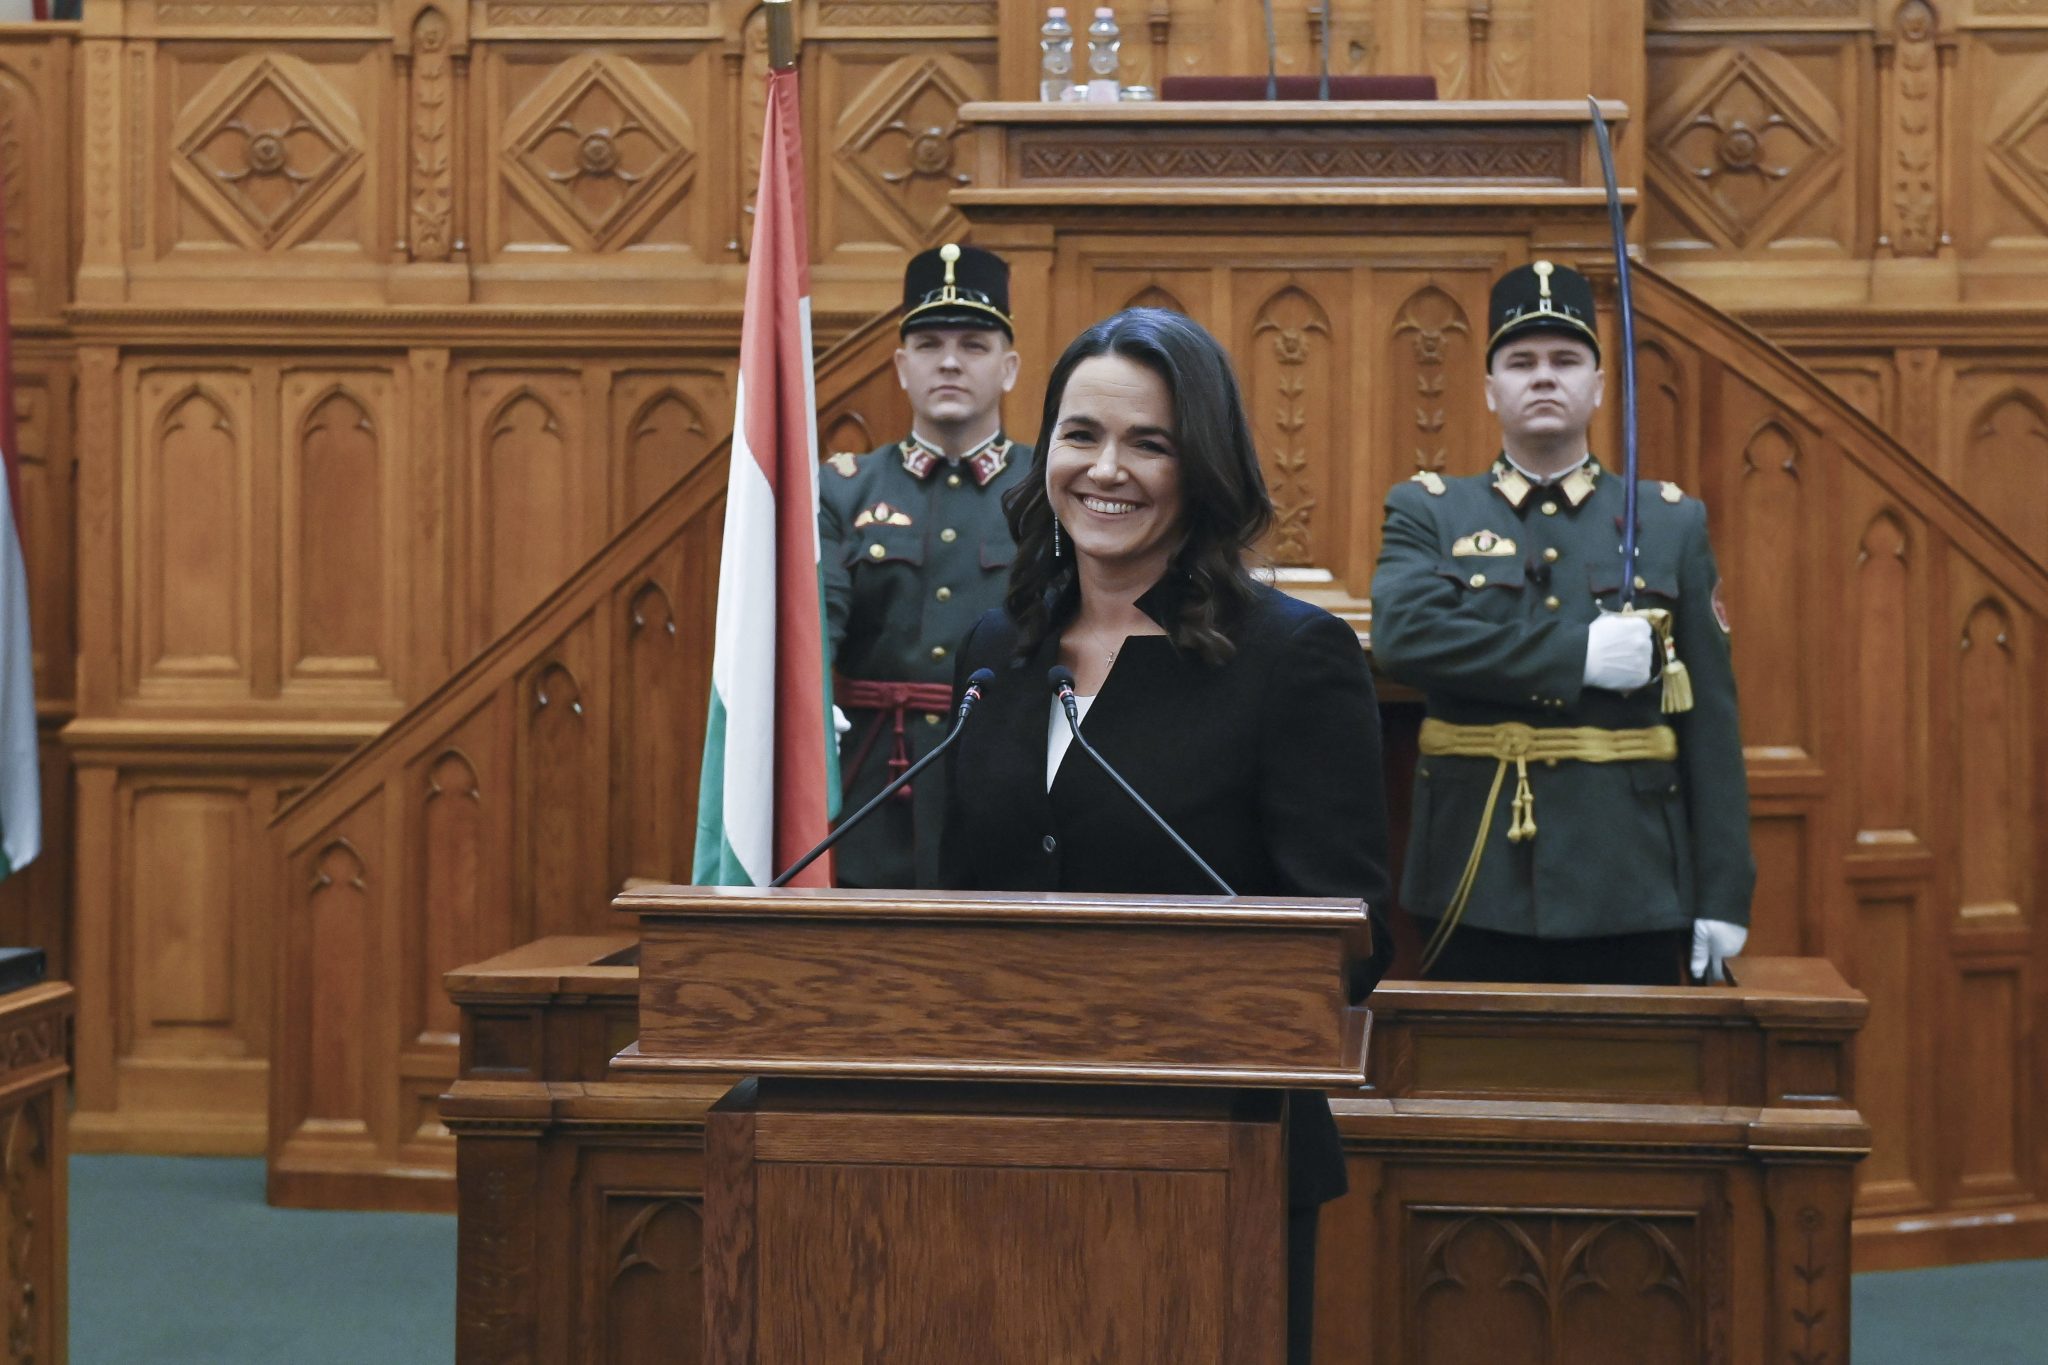 Watch: First Female President In Hungary Elected